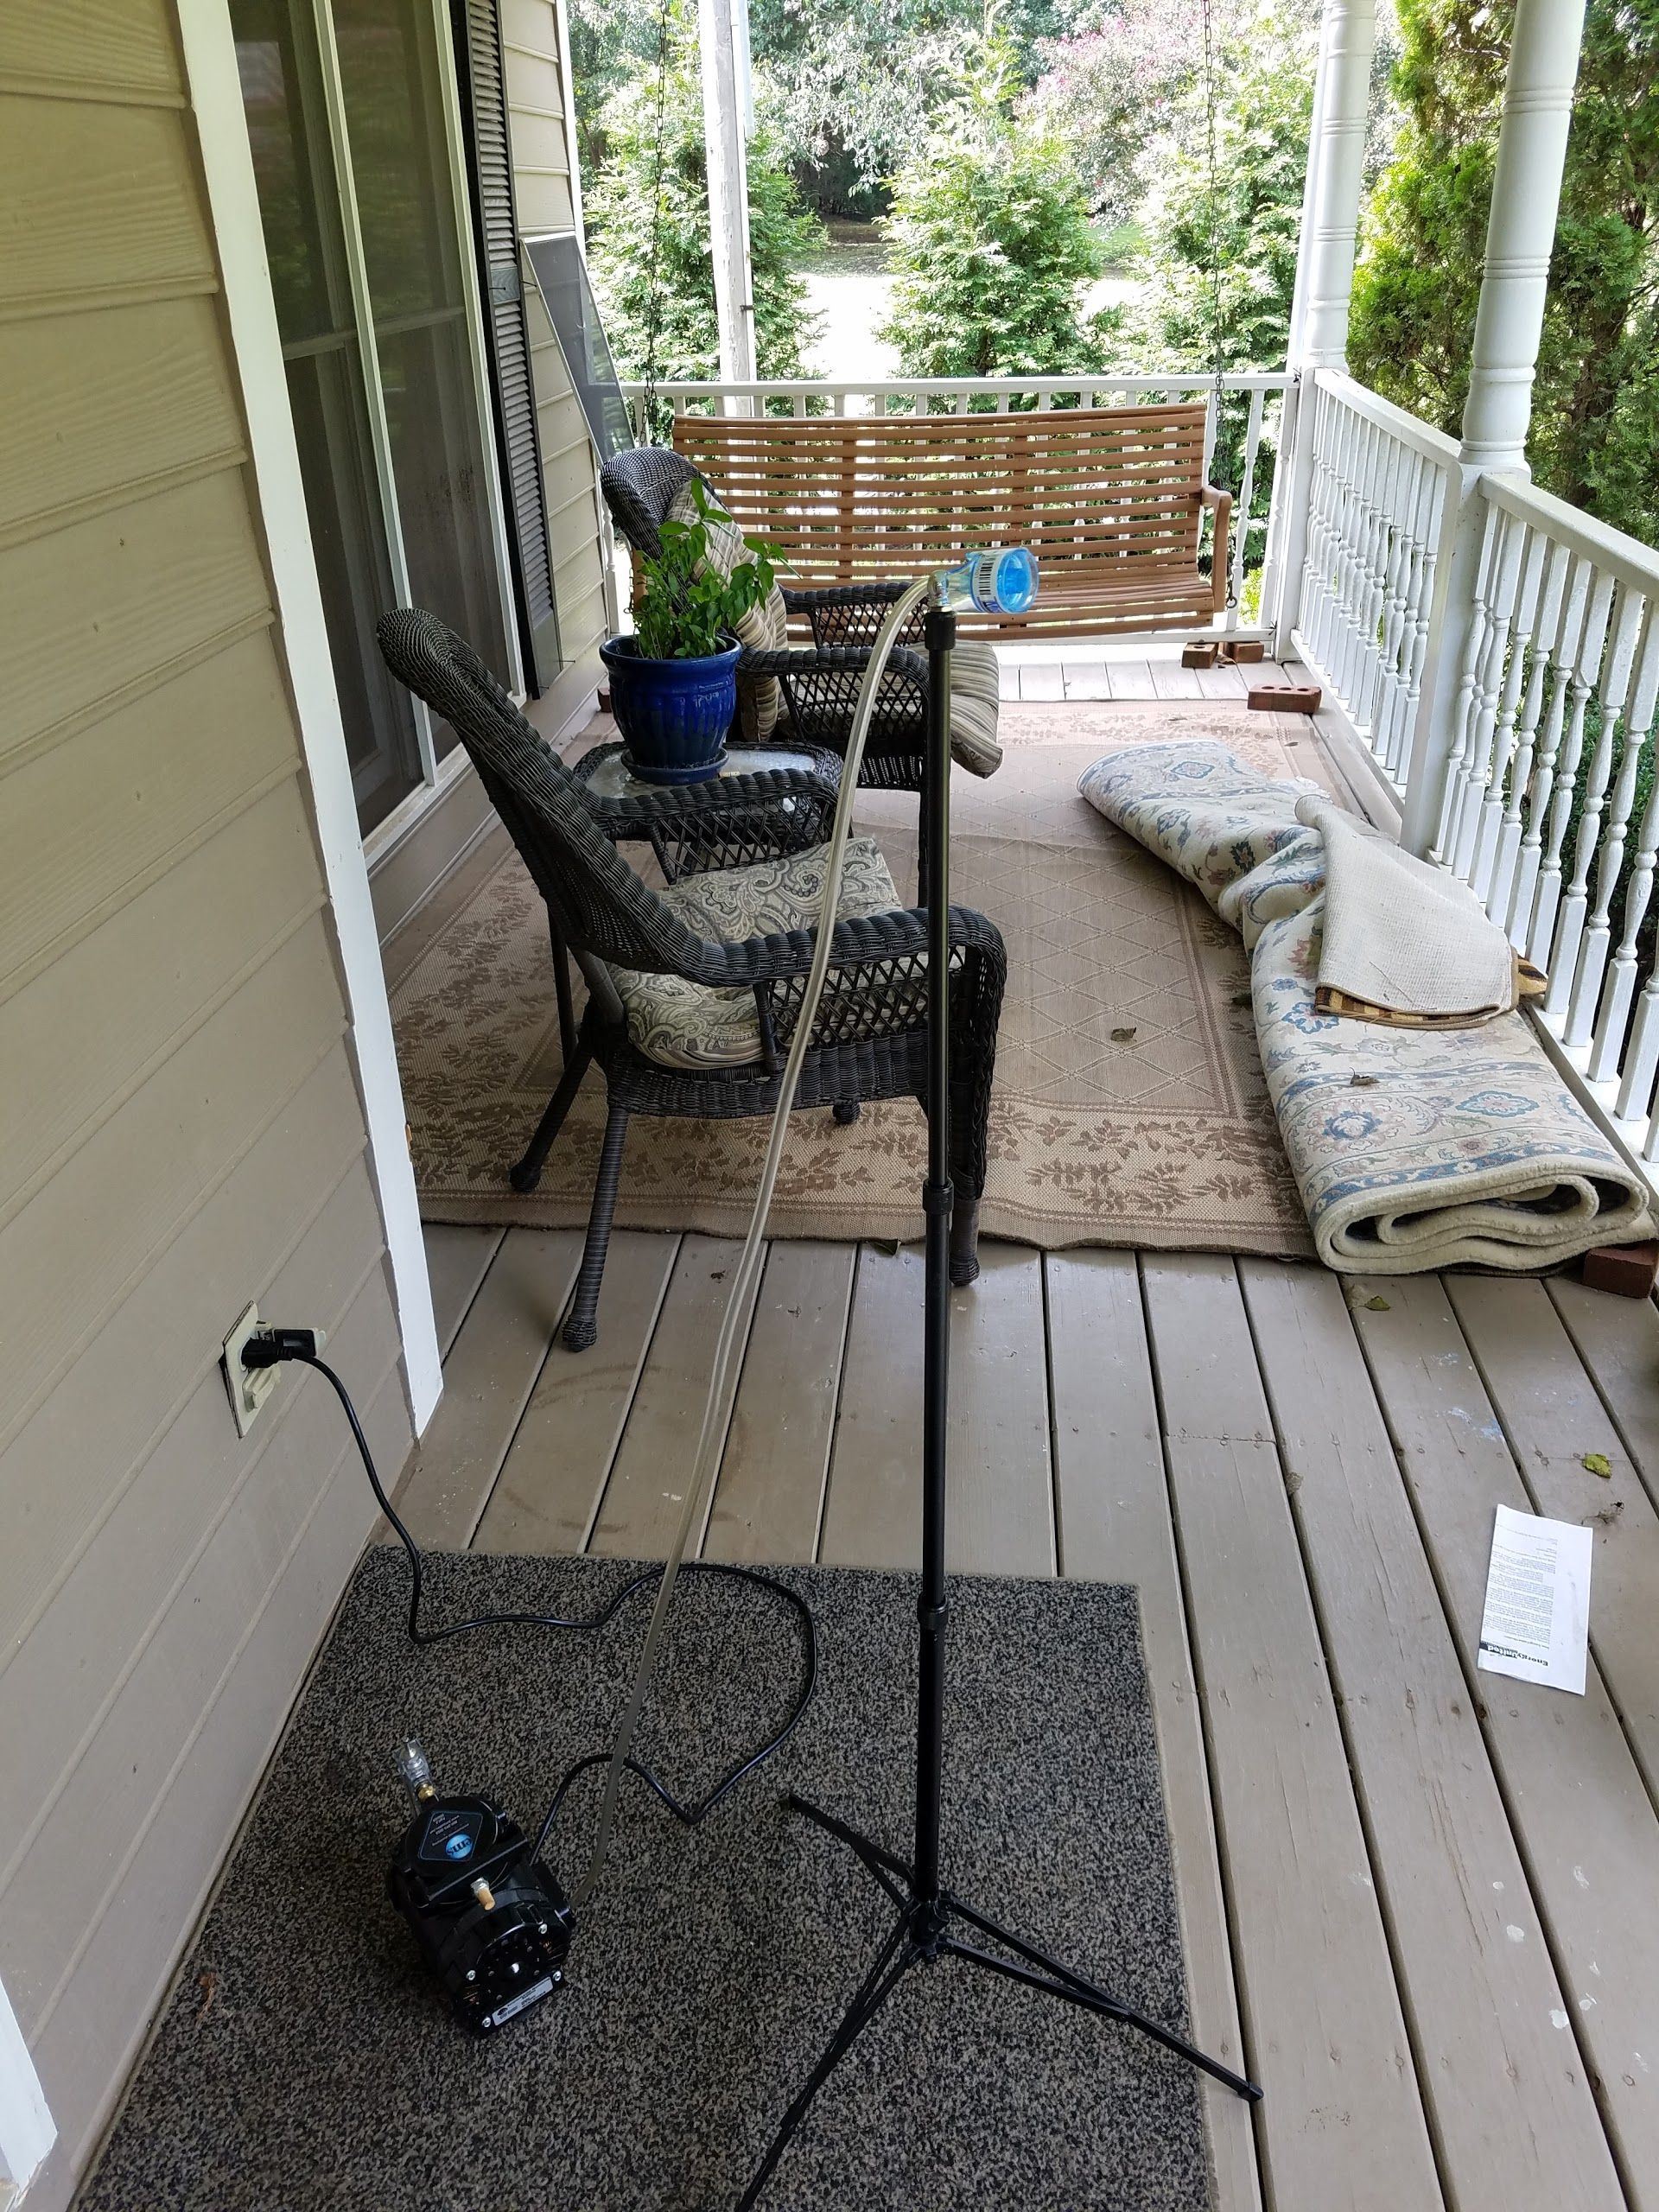 a microphone stand is sitting on a porch next to a chair